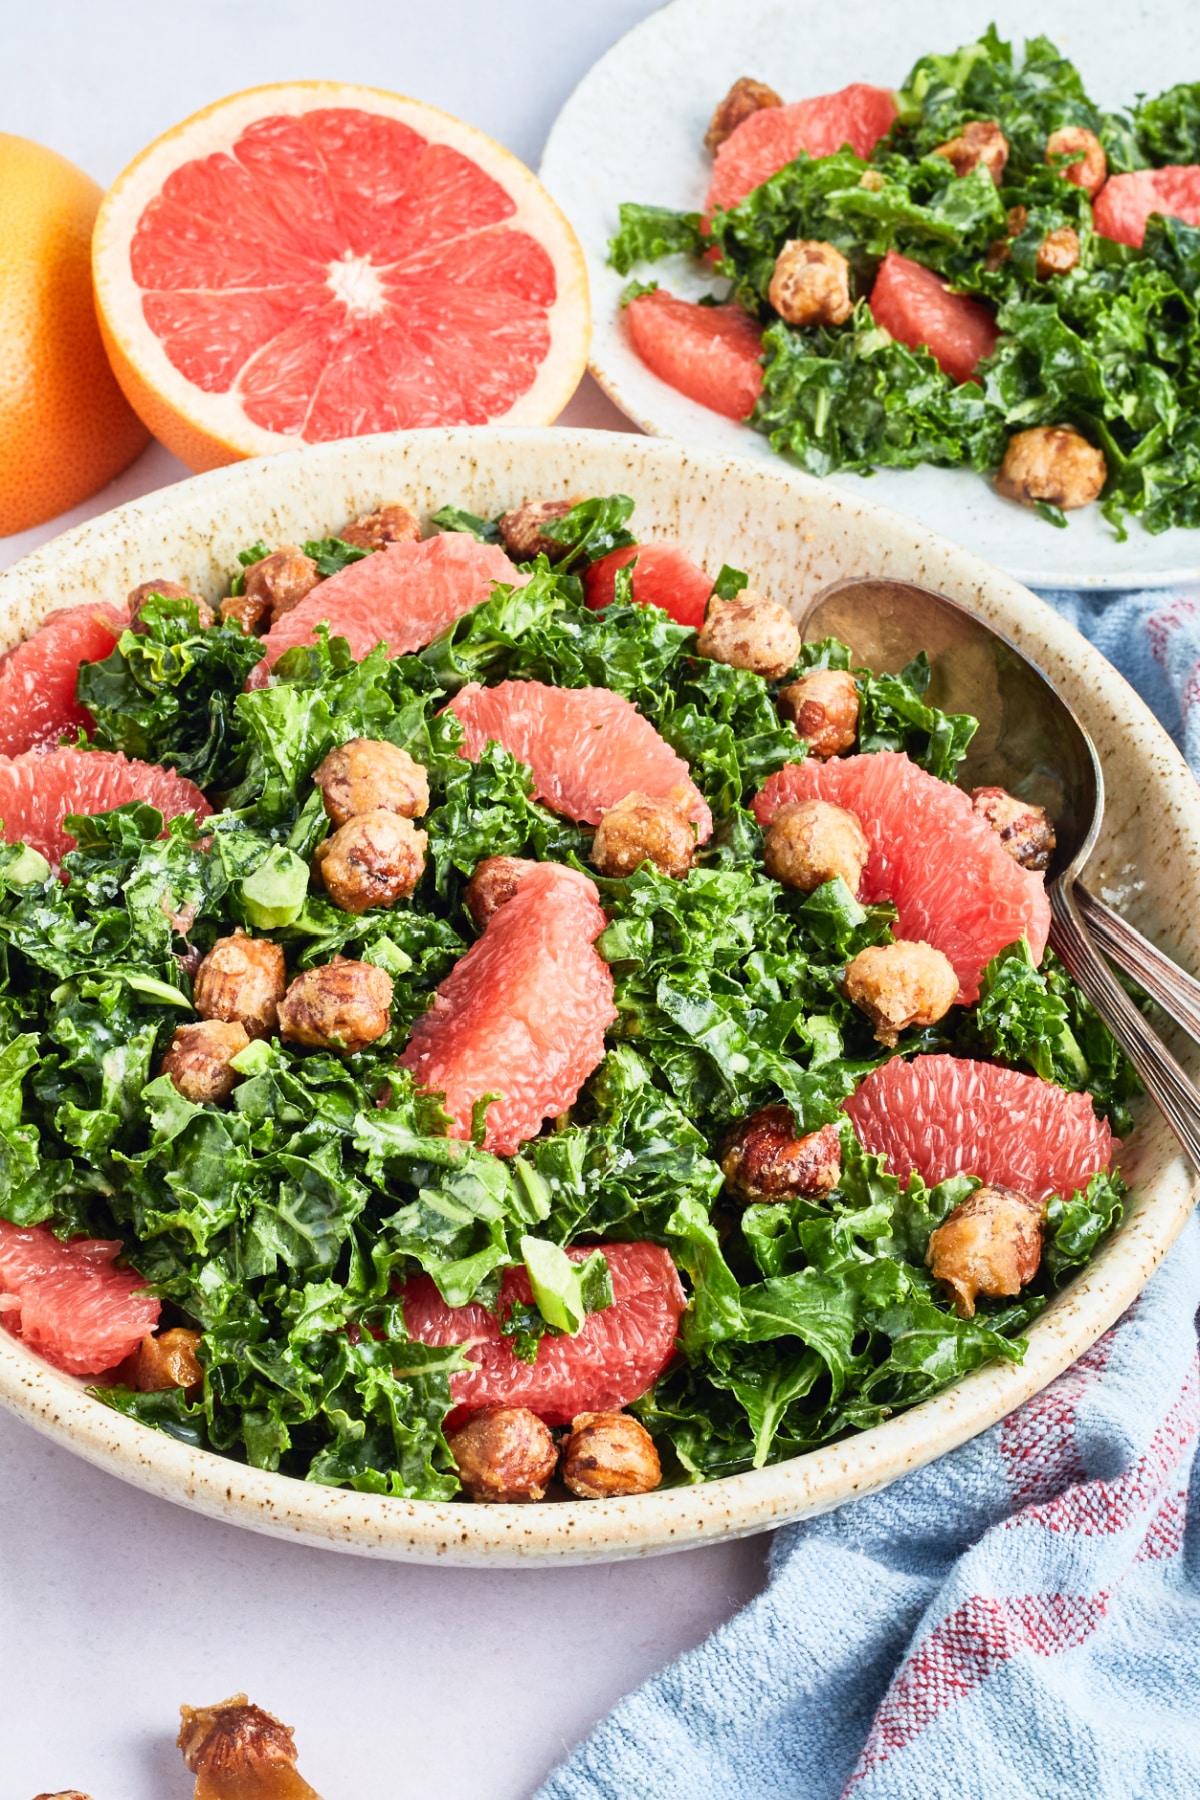 A large stoneware serving bowl of grapefruit kale salad sits on a white surface. Next to the bowl of salad is a fresh grapefruit cut in half, a plate of salad, a few hazelnuts, and a blue cloth napkin.